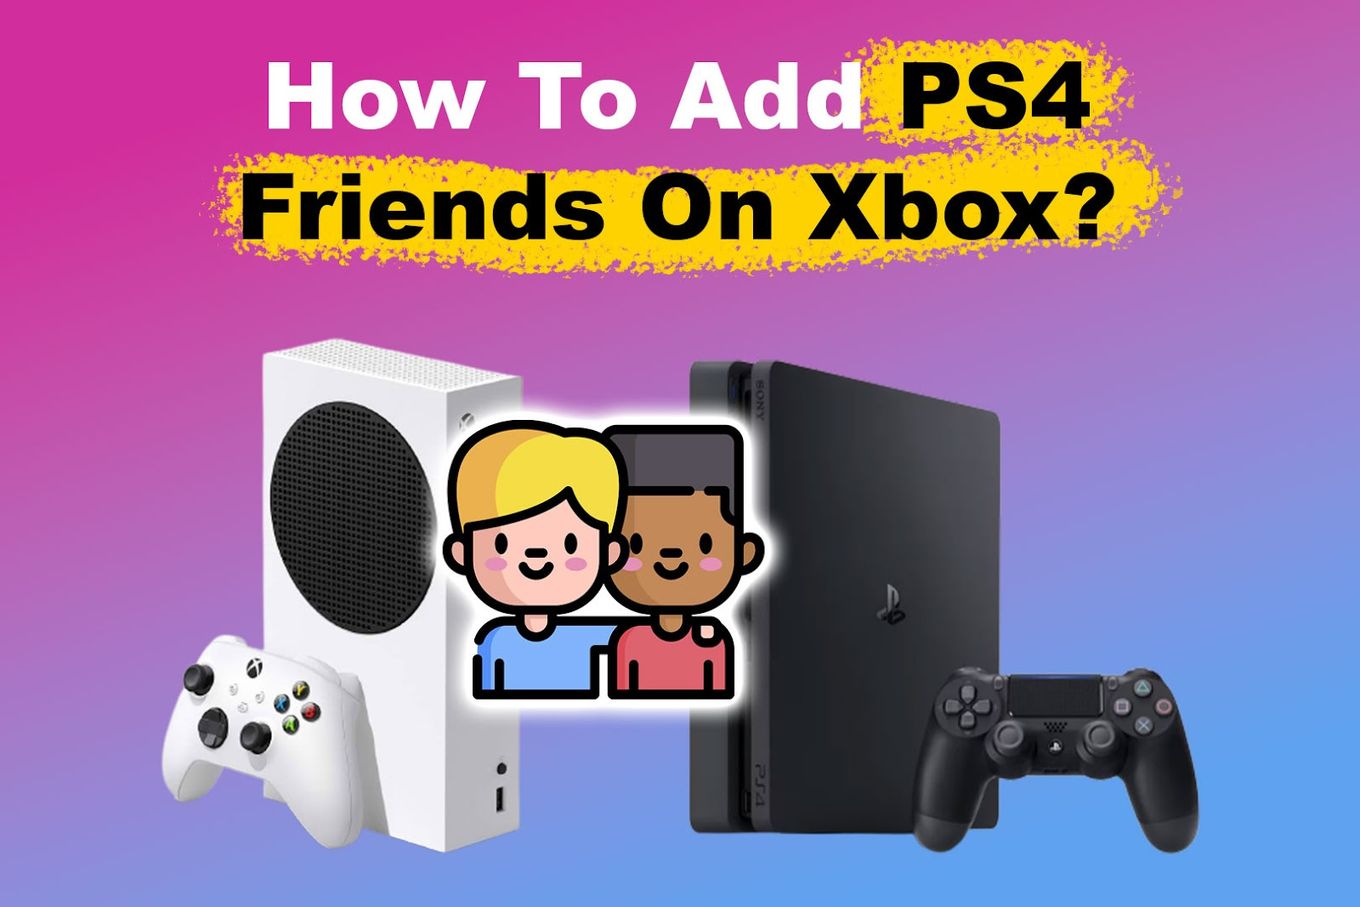 How To Add PS4 Friends On Xbox